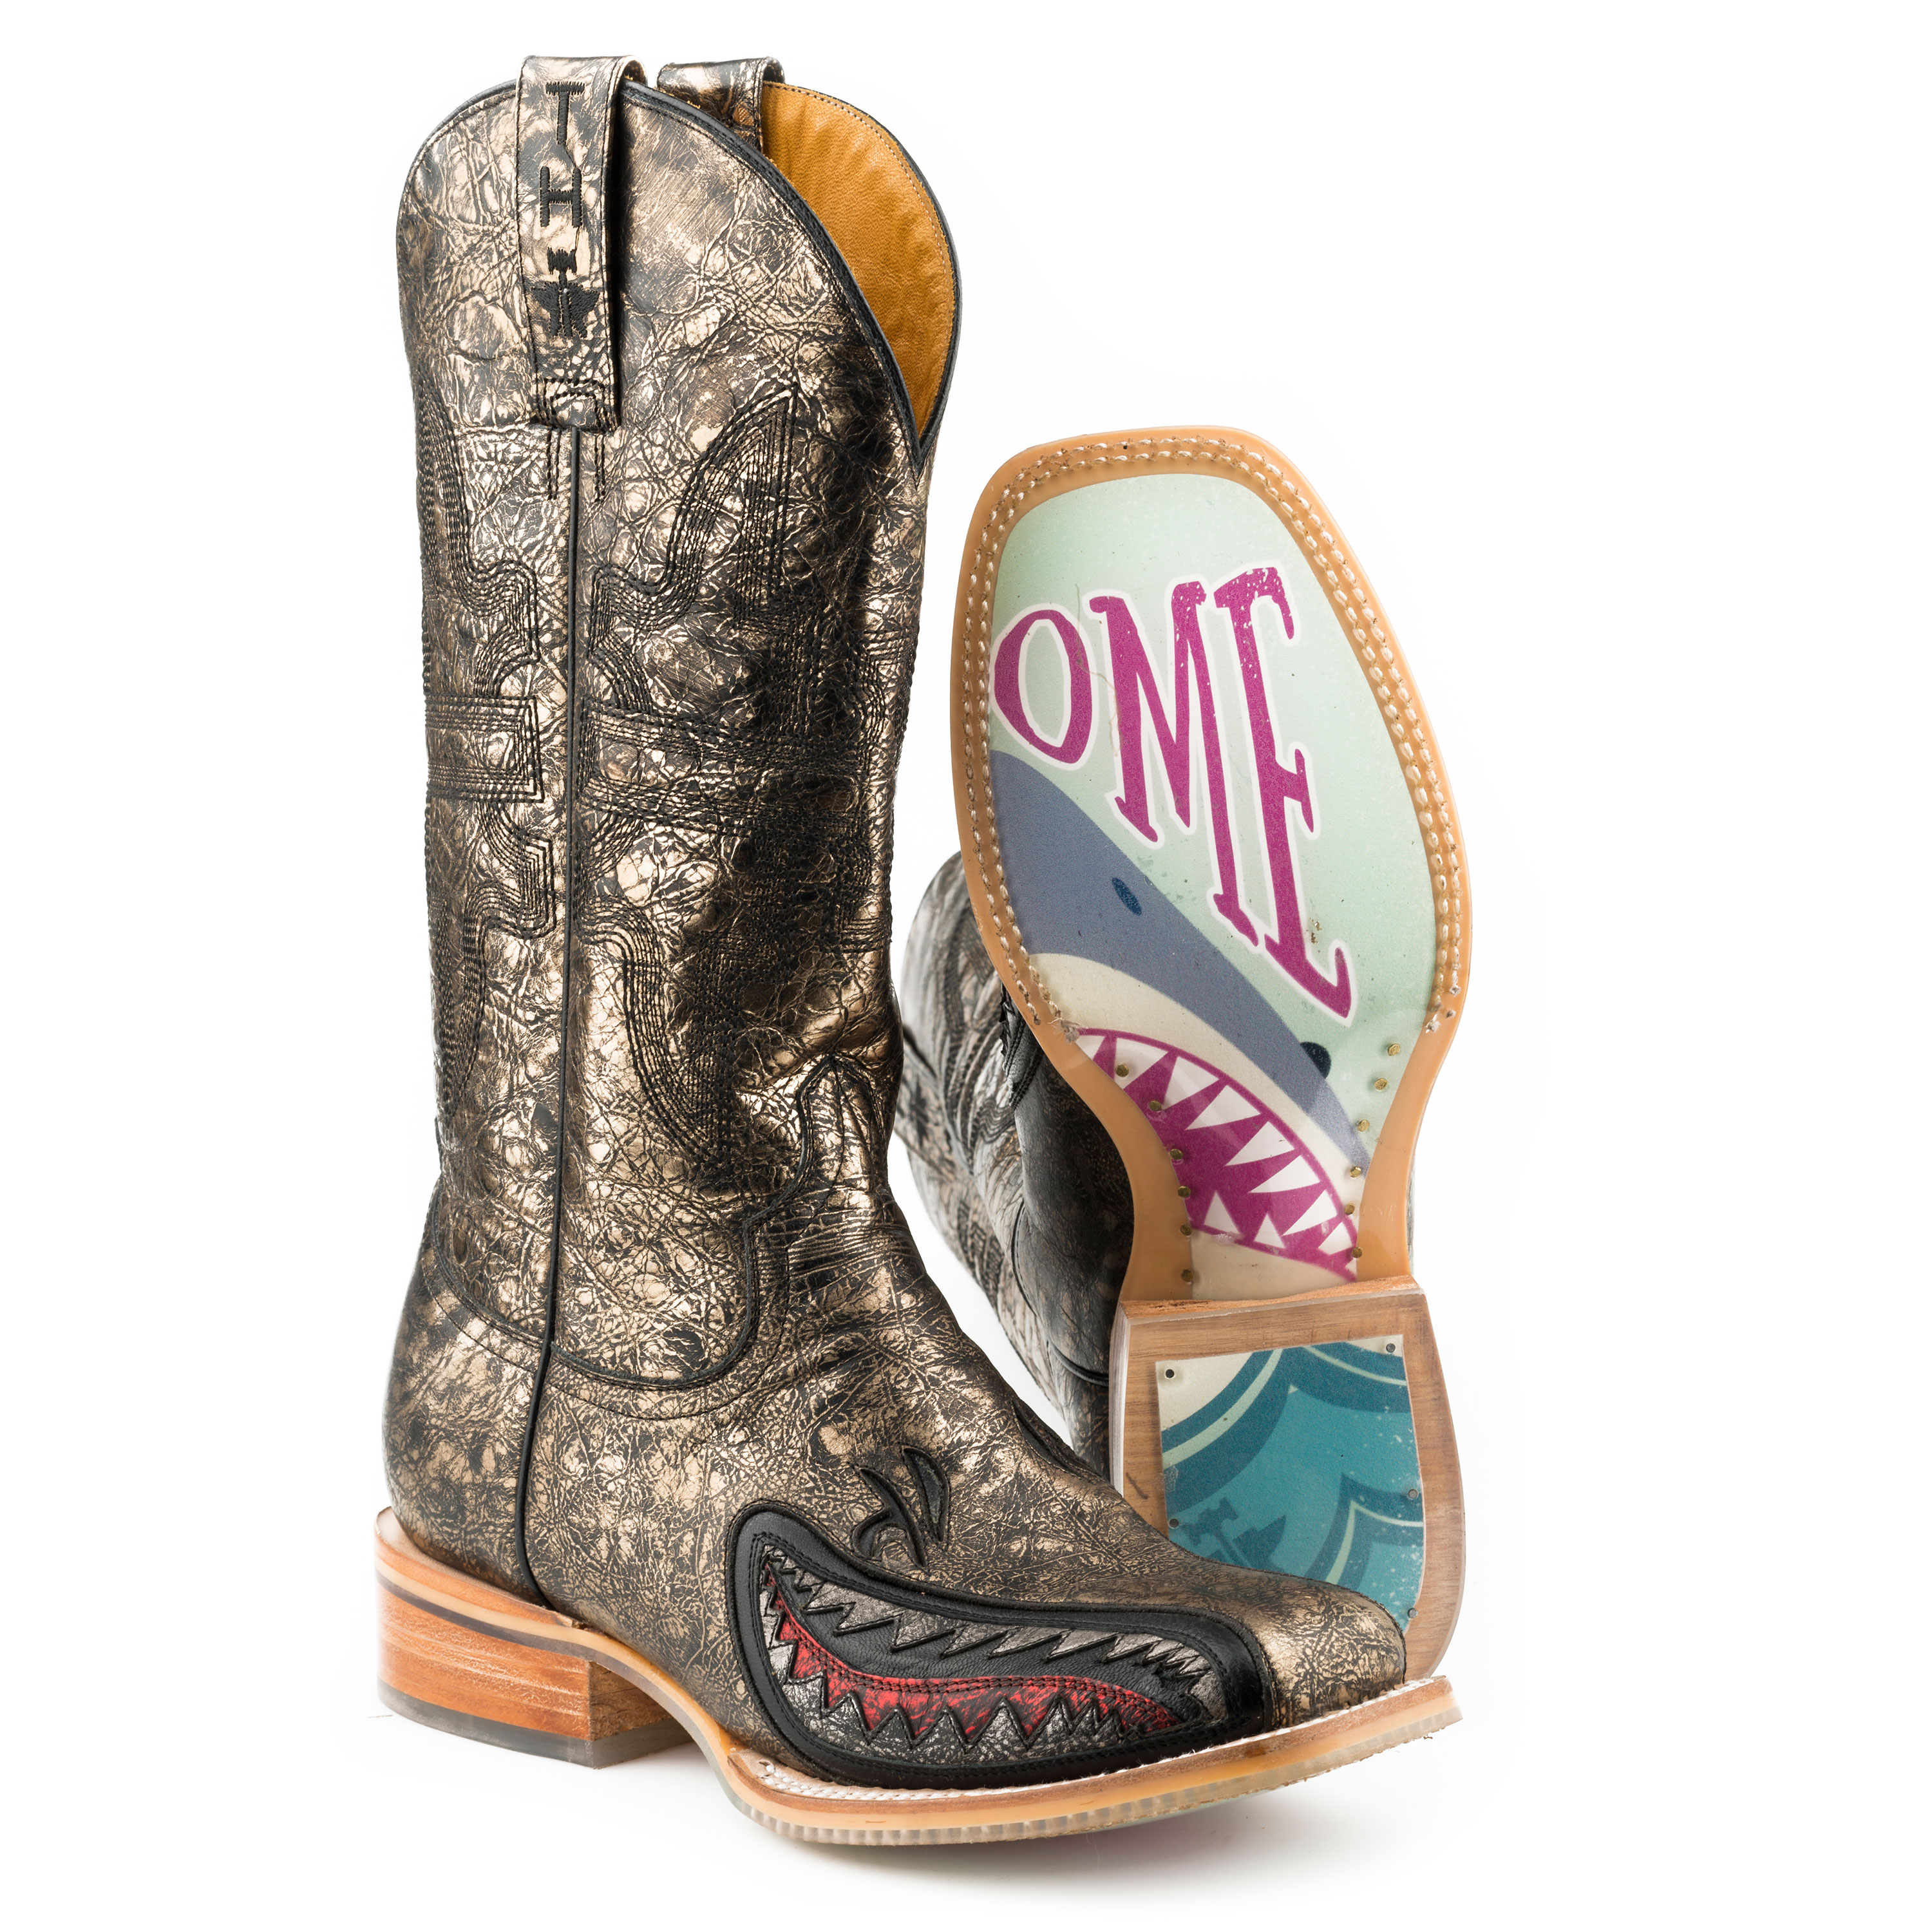 Buy > maneater tin haul boots > in stock